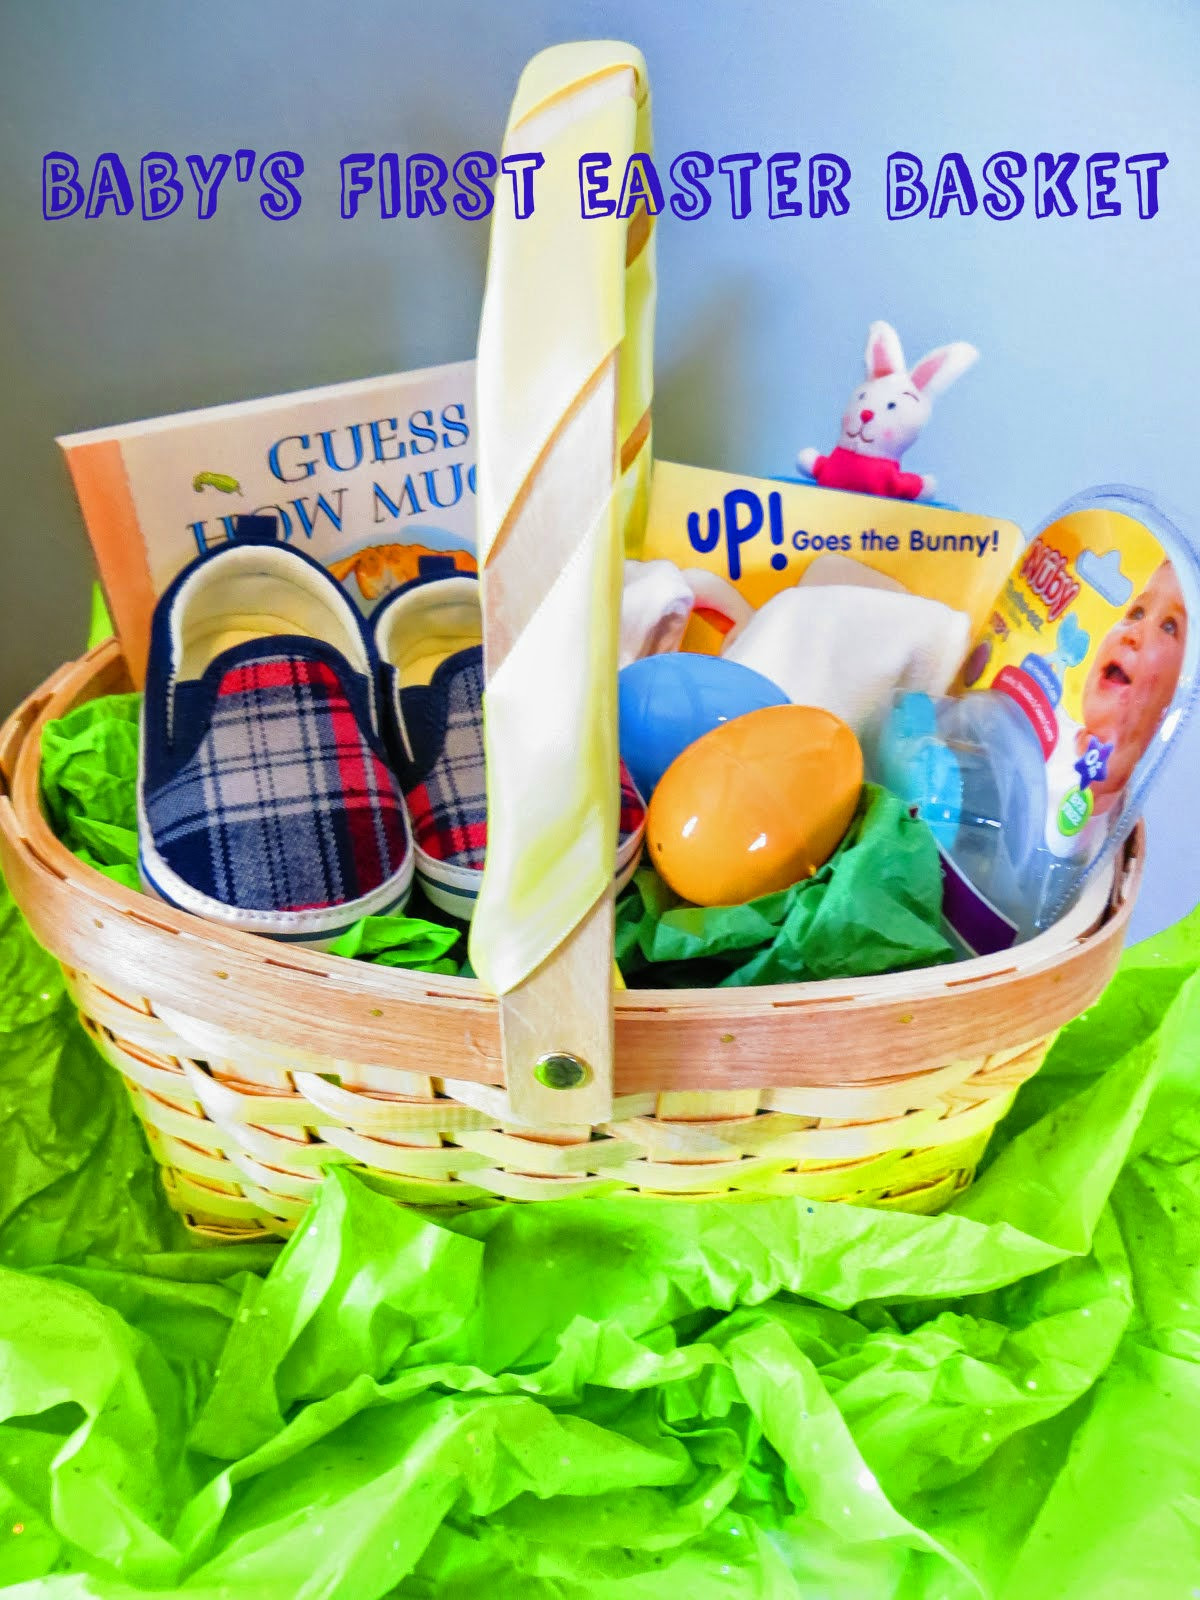 Gift Ideas For Baby'S First Easter
 Beautifully Candid Baby s First Easter Basket